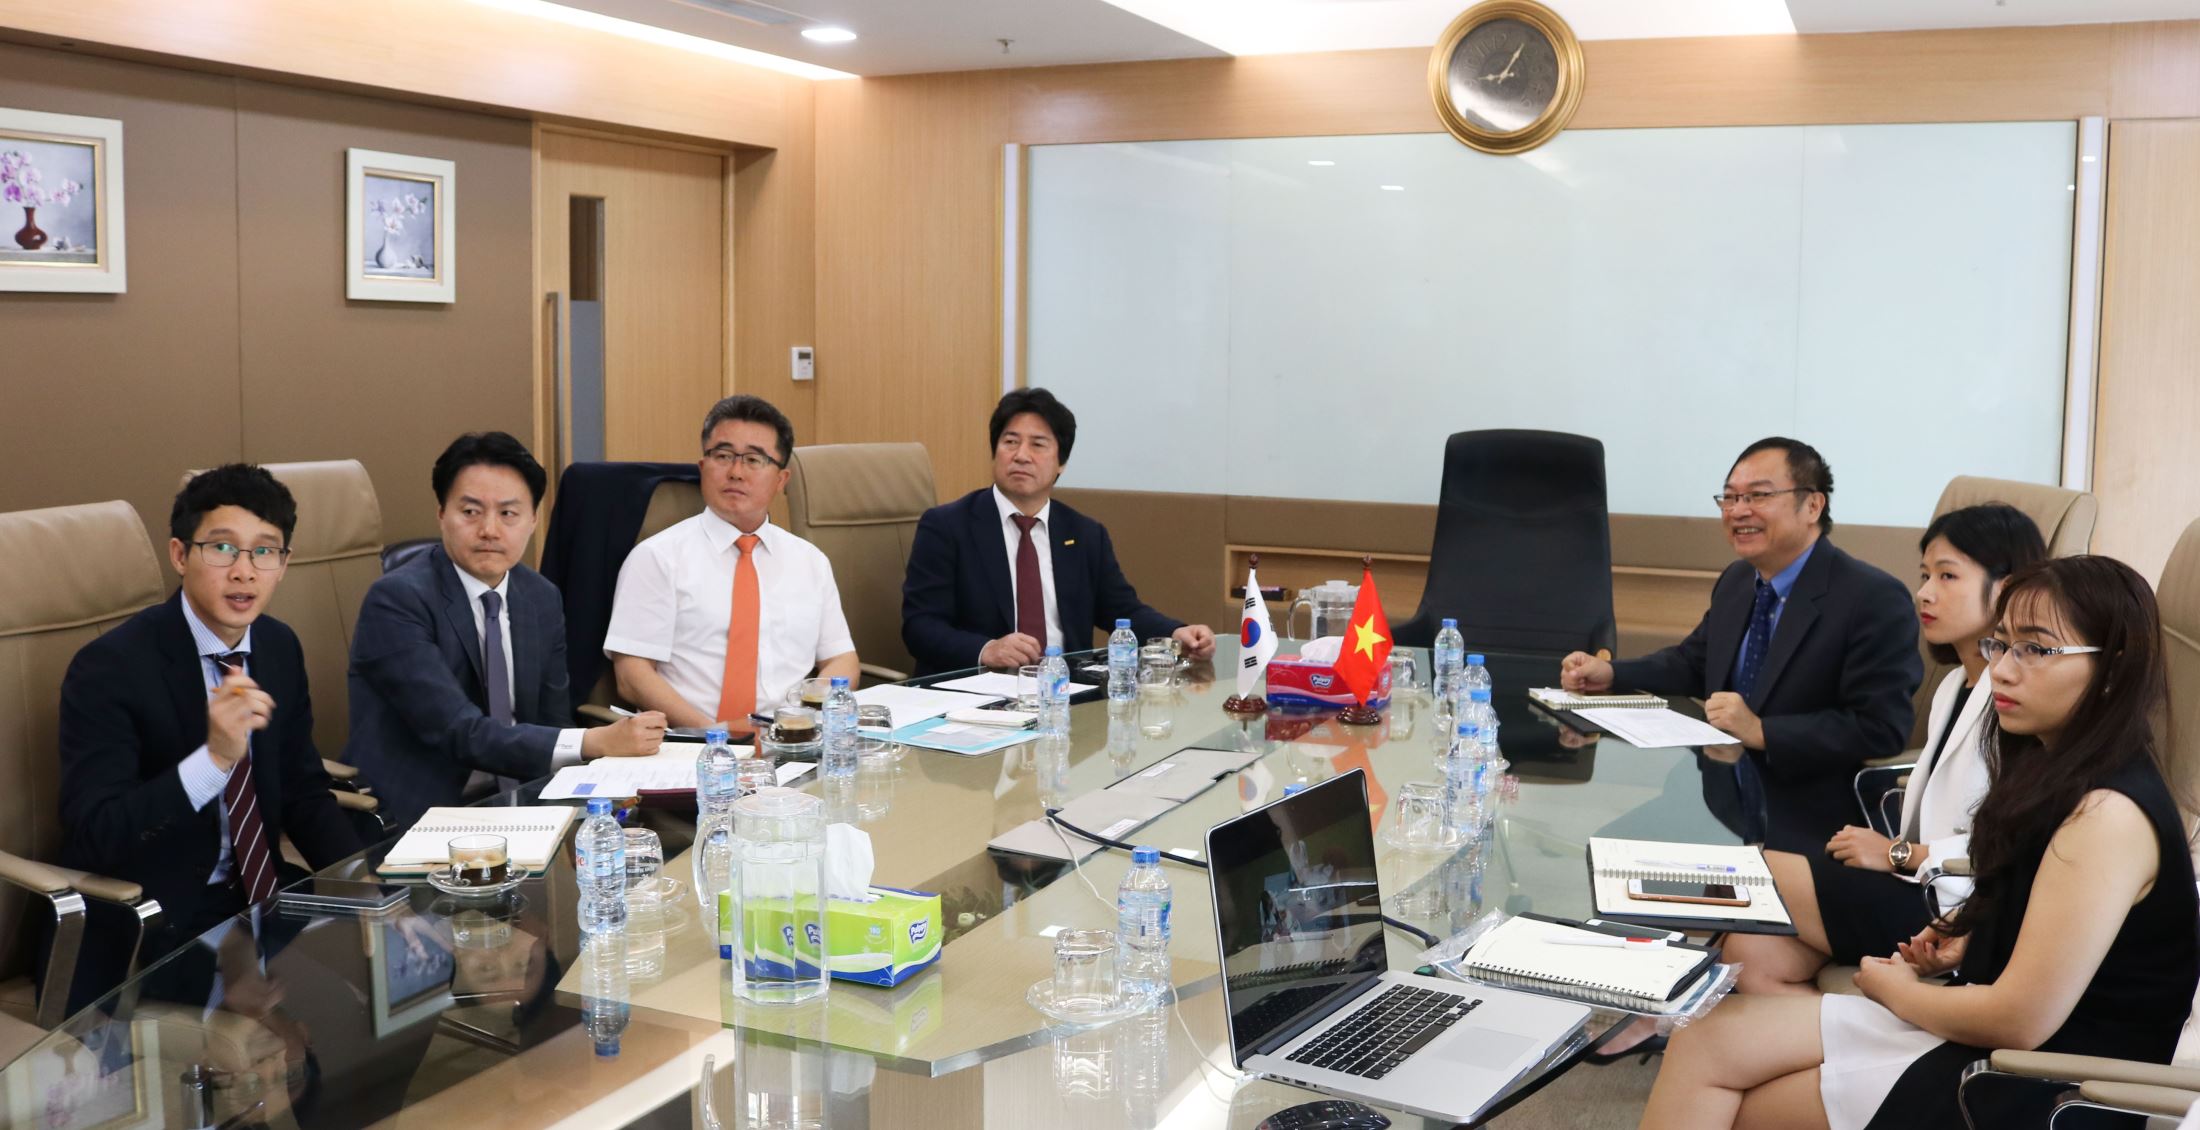 Dr. Dinh Quang Nuong, Deputy CEO of NHG, welcomed the KU’s delegation, and highly appreciated the cooperation items between the two parties after signing MOU